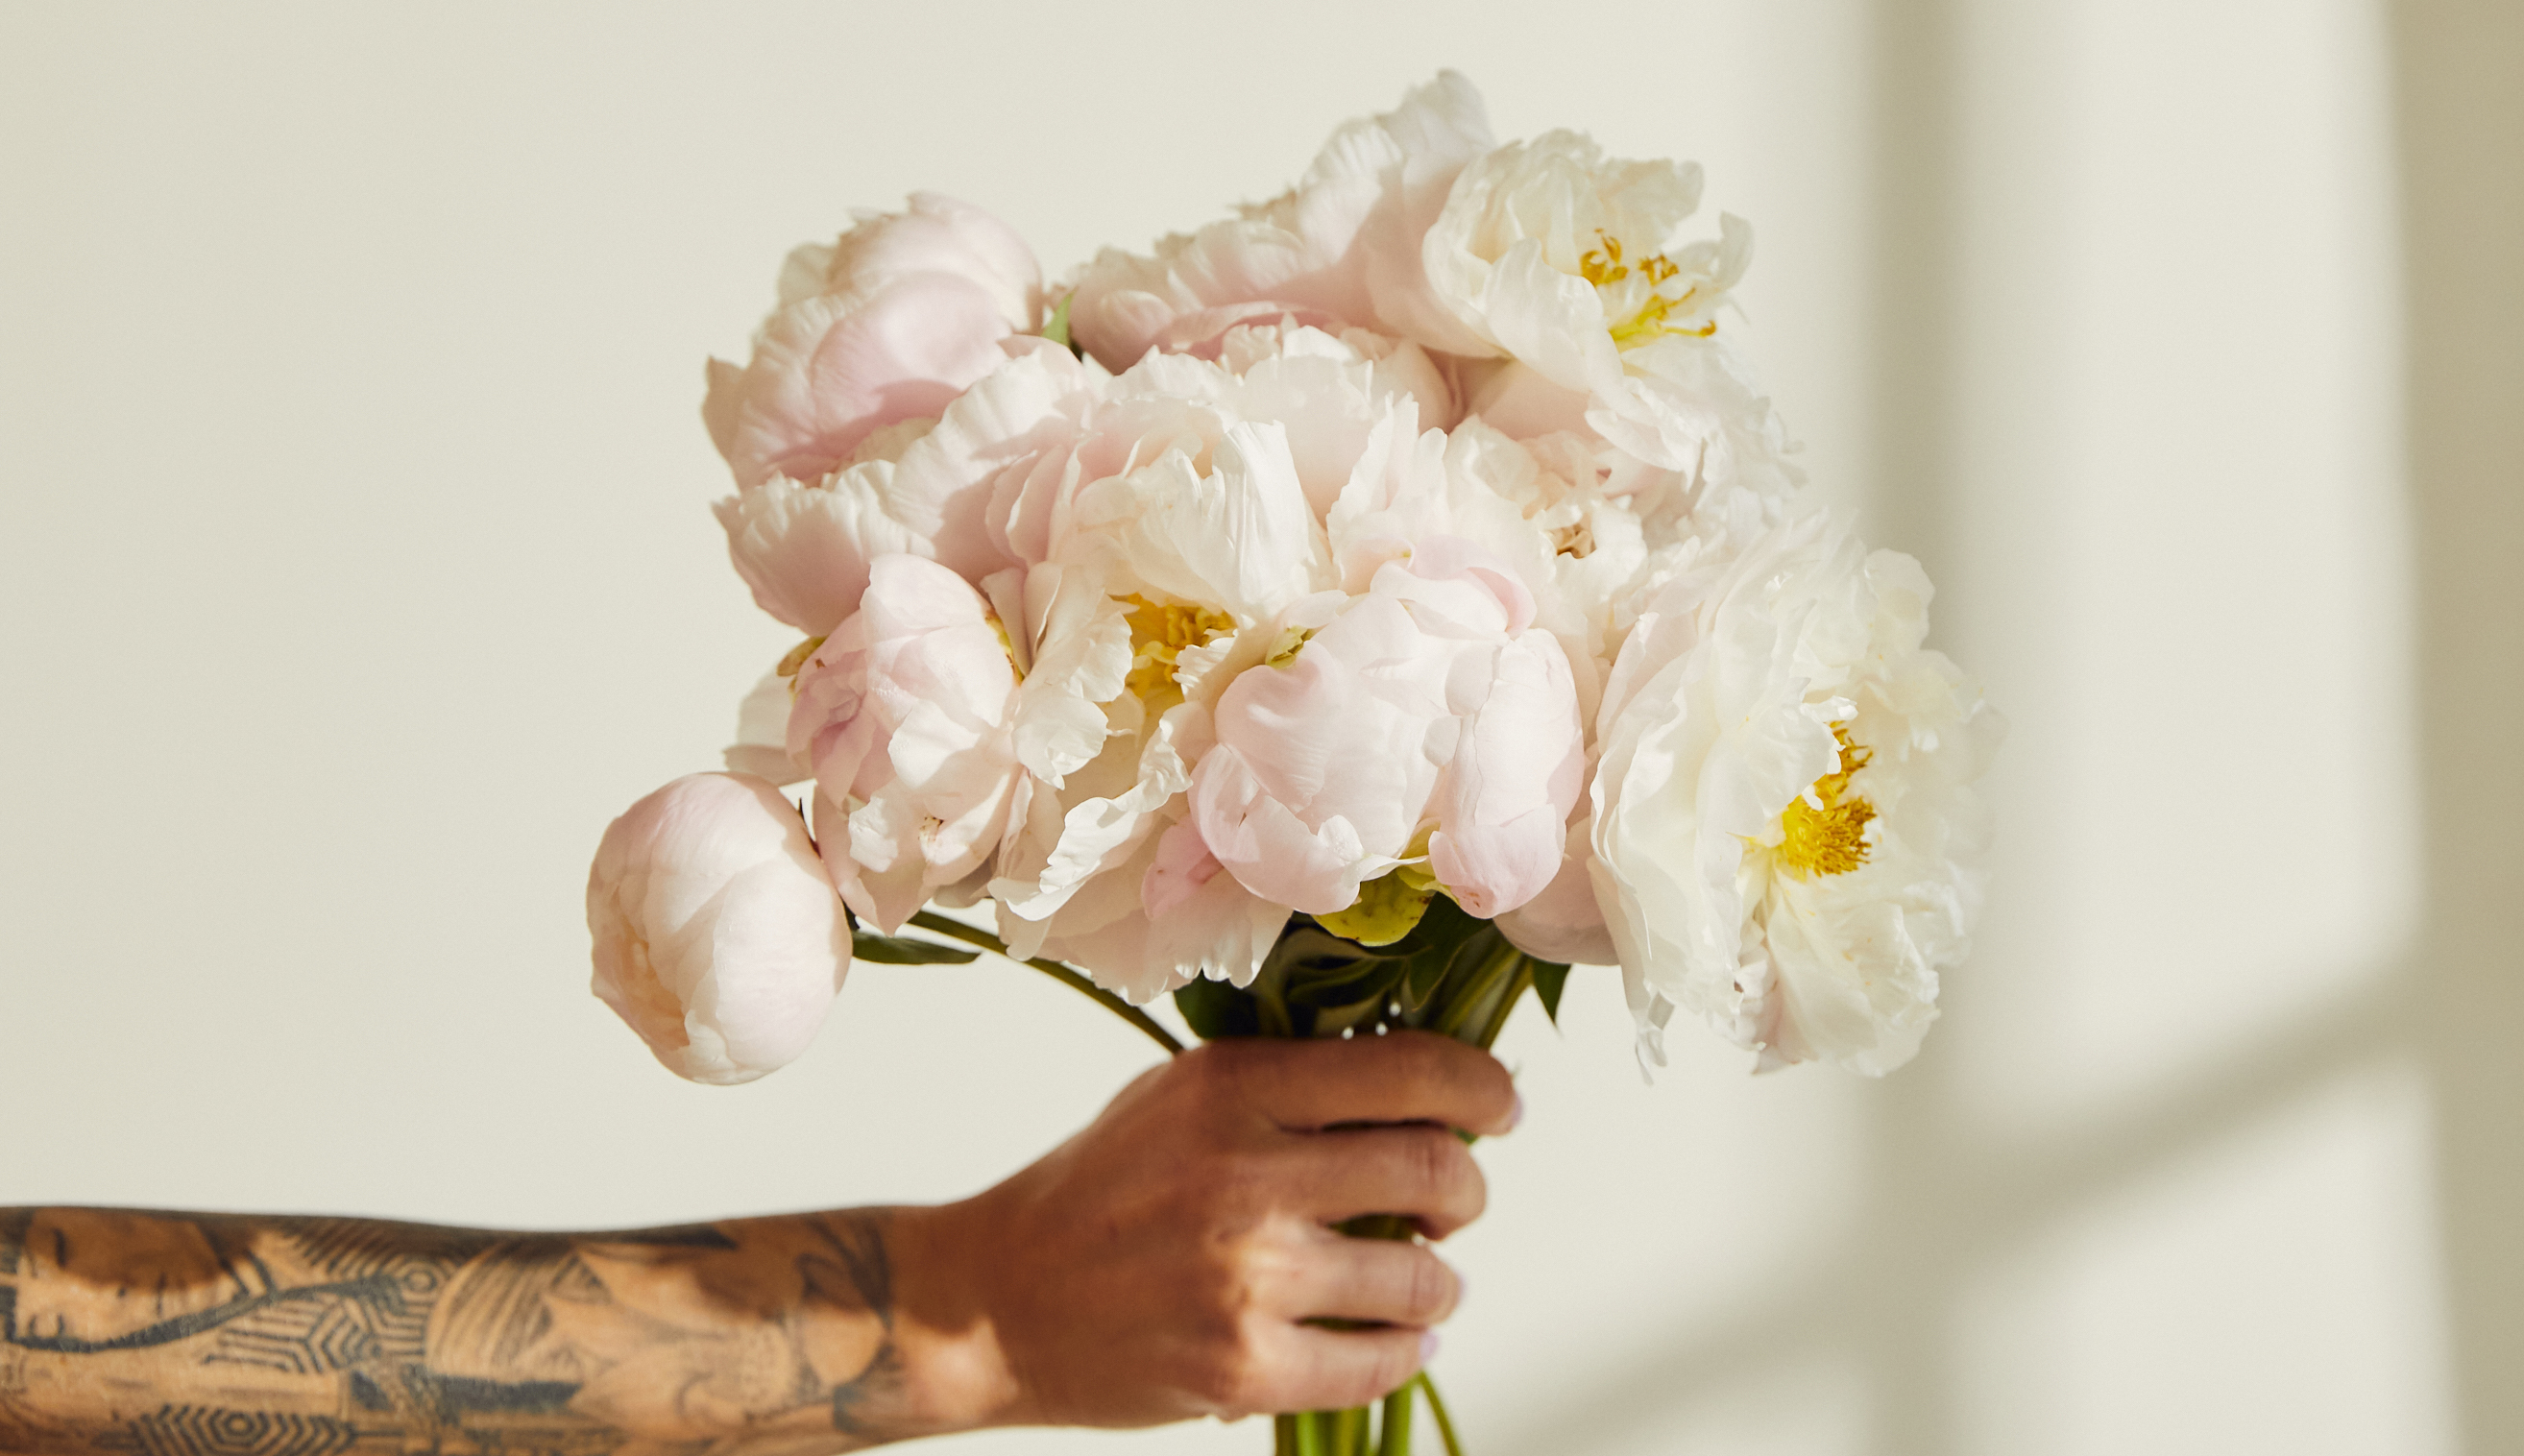 Hand holding bouquet of pale peonies